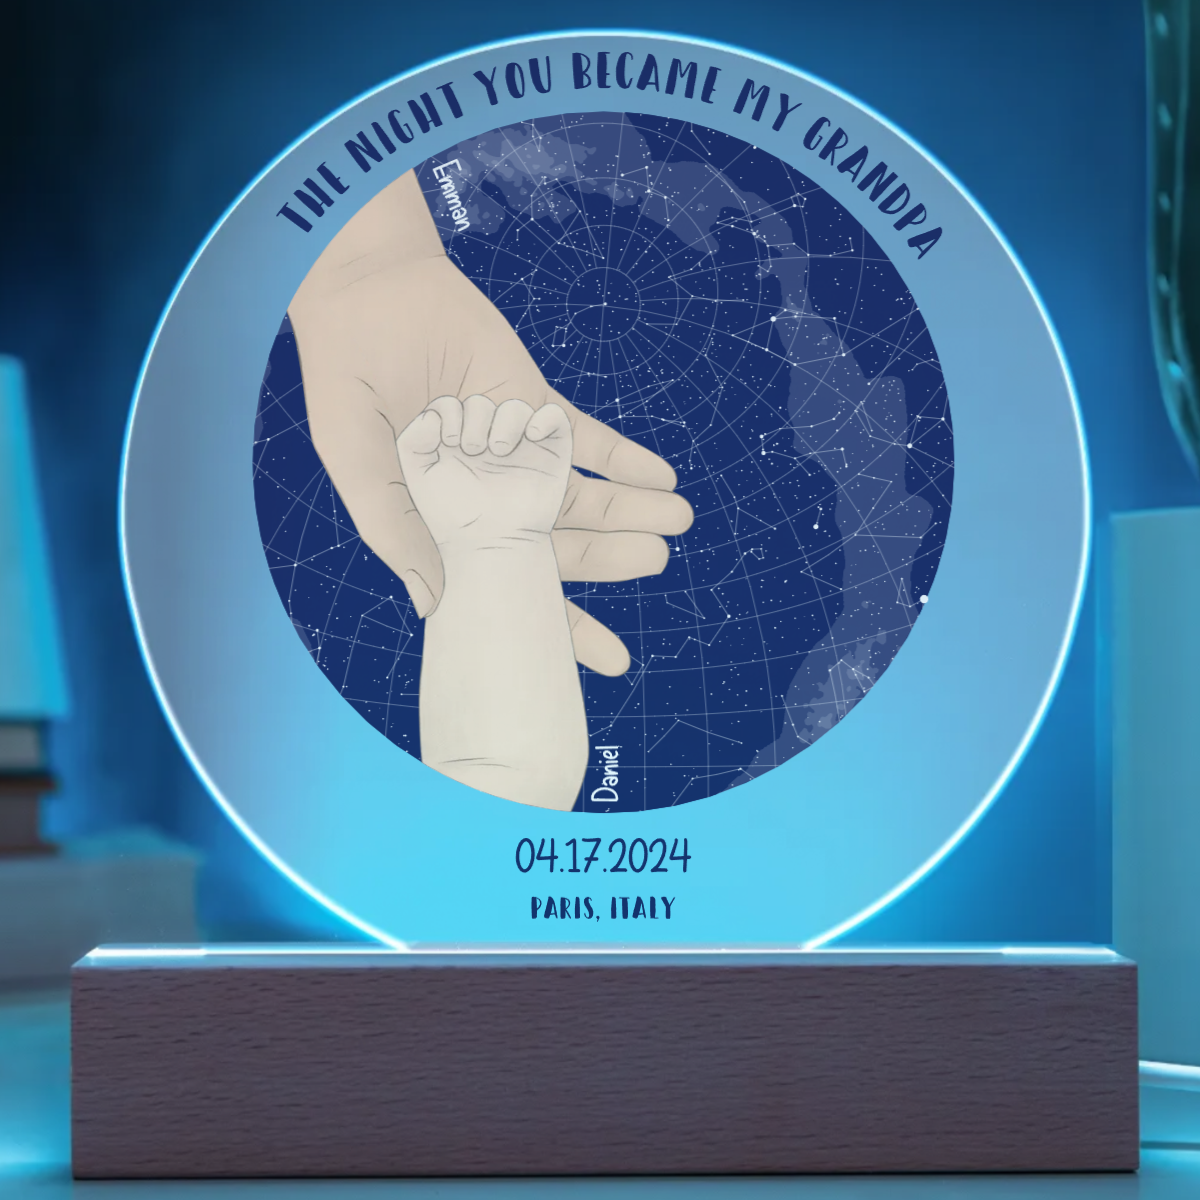 Personalized "The Night Your Became My Daddy/Grandpa" Circle Acrylic Plaque